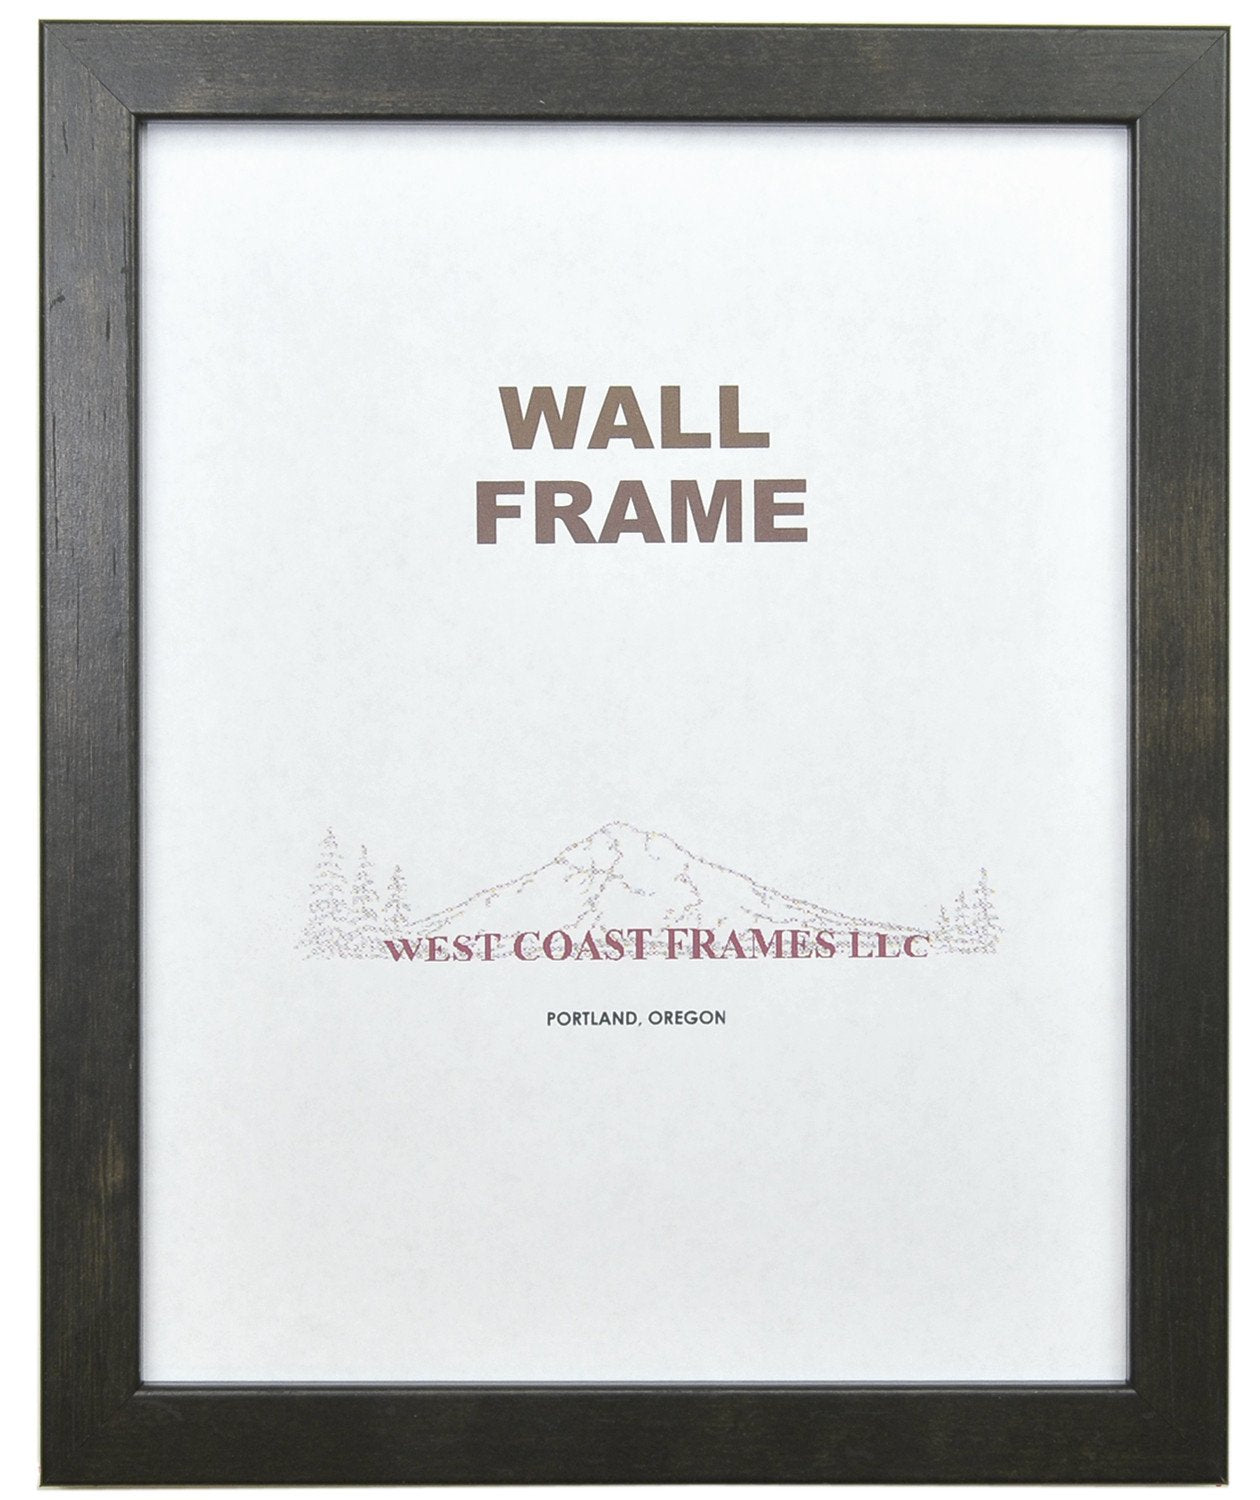 Picture Frame Multiple Colors - Black 72079 - Gray 72030 - White 72021 - Gold 72054 - MADE IN USA